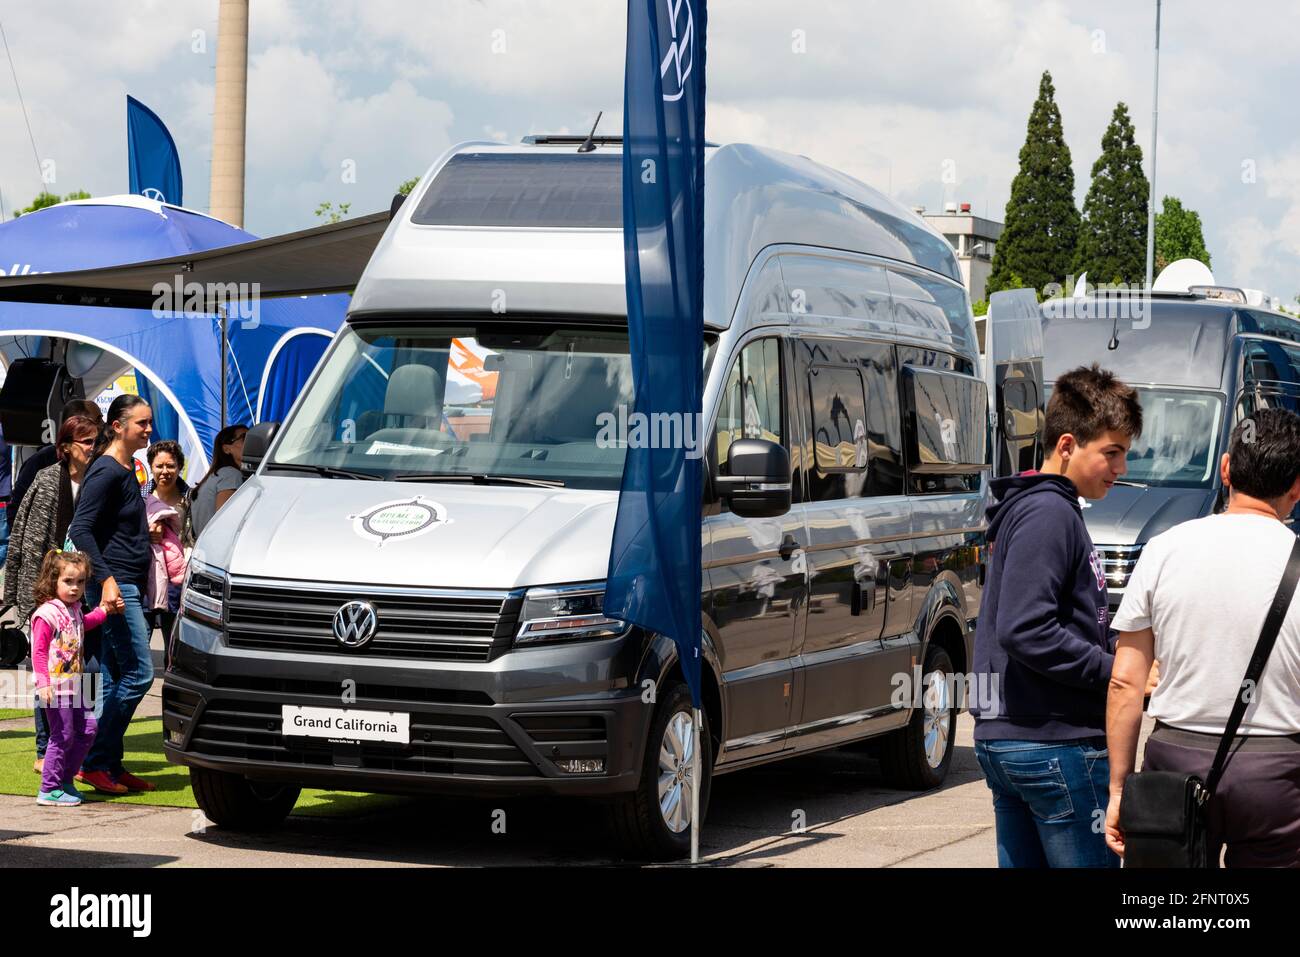 The new VW Grand California 600 motorhome campervan and visitors during the Camping and Caravanning Expo Show in Sofia, Bulgaria as of May 2021 Stock Photo